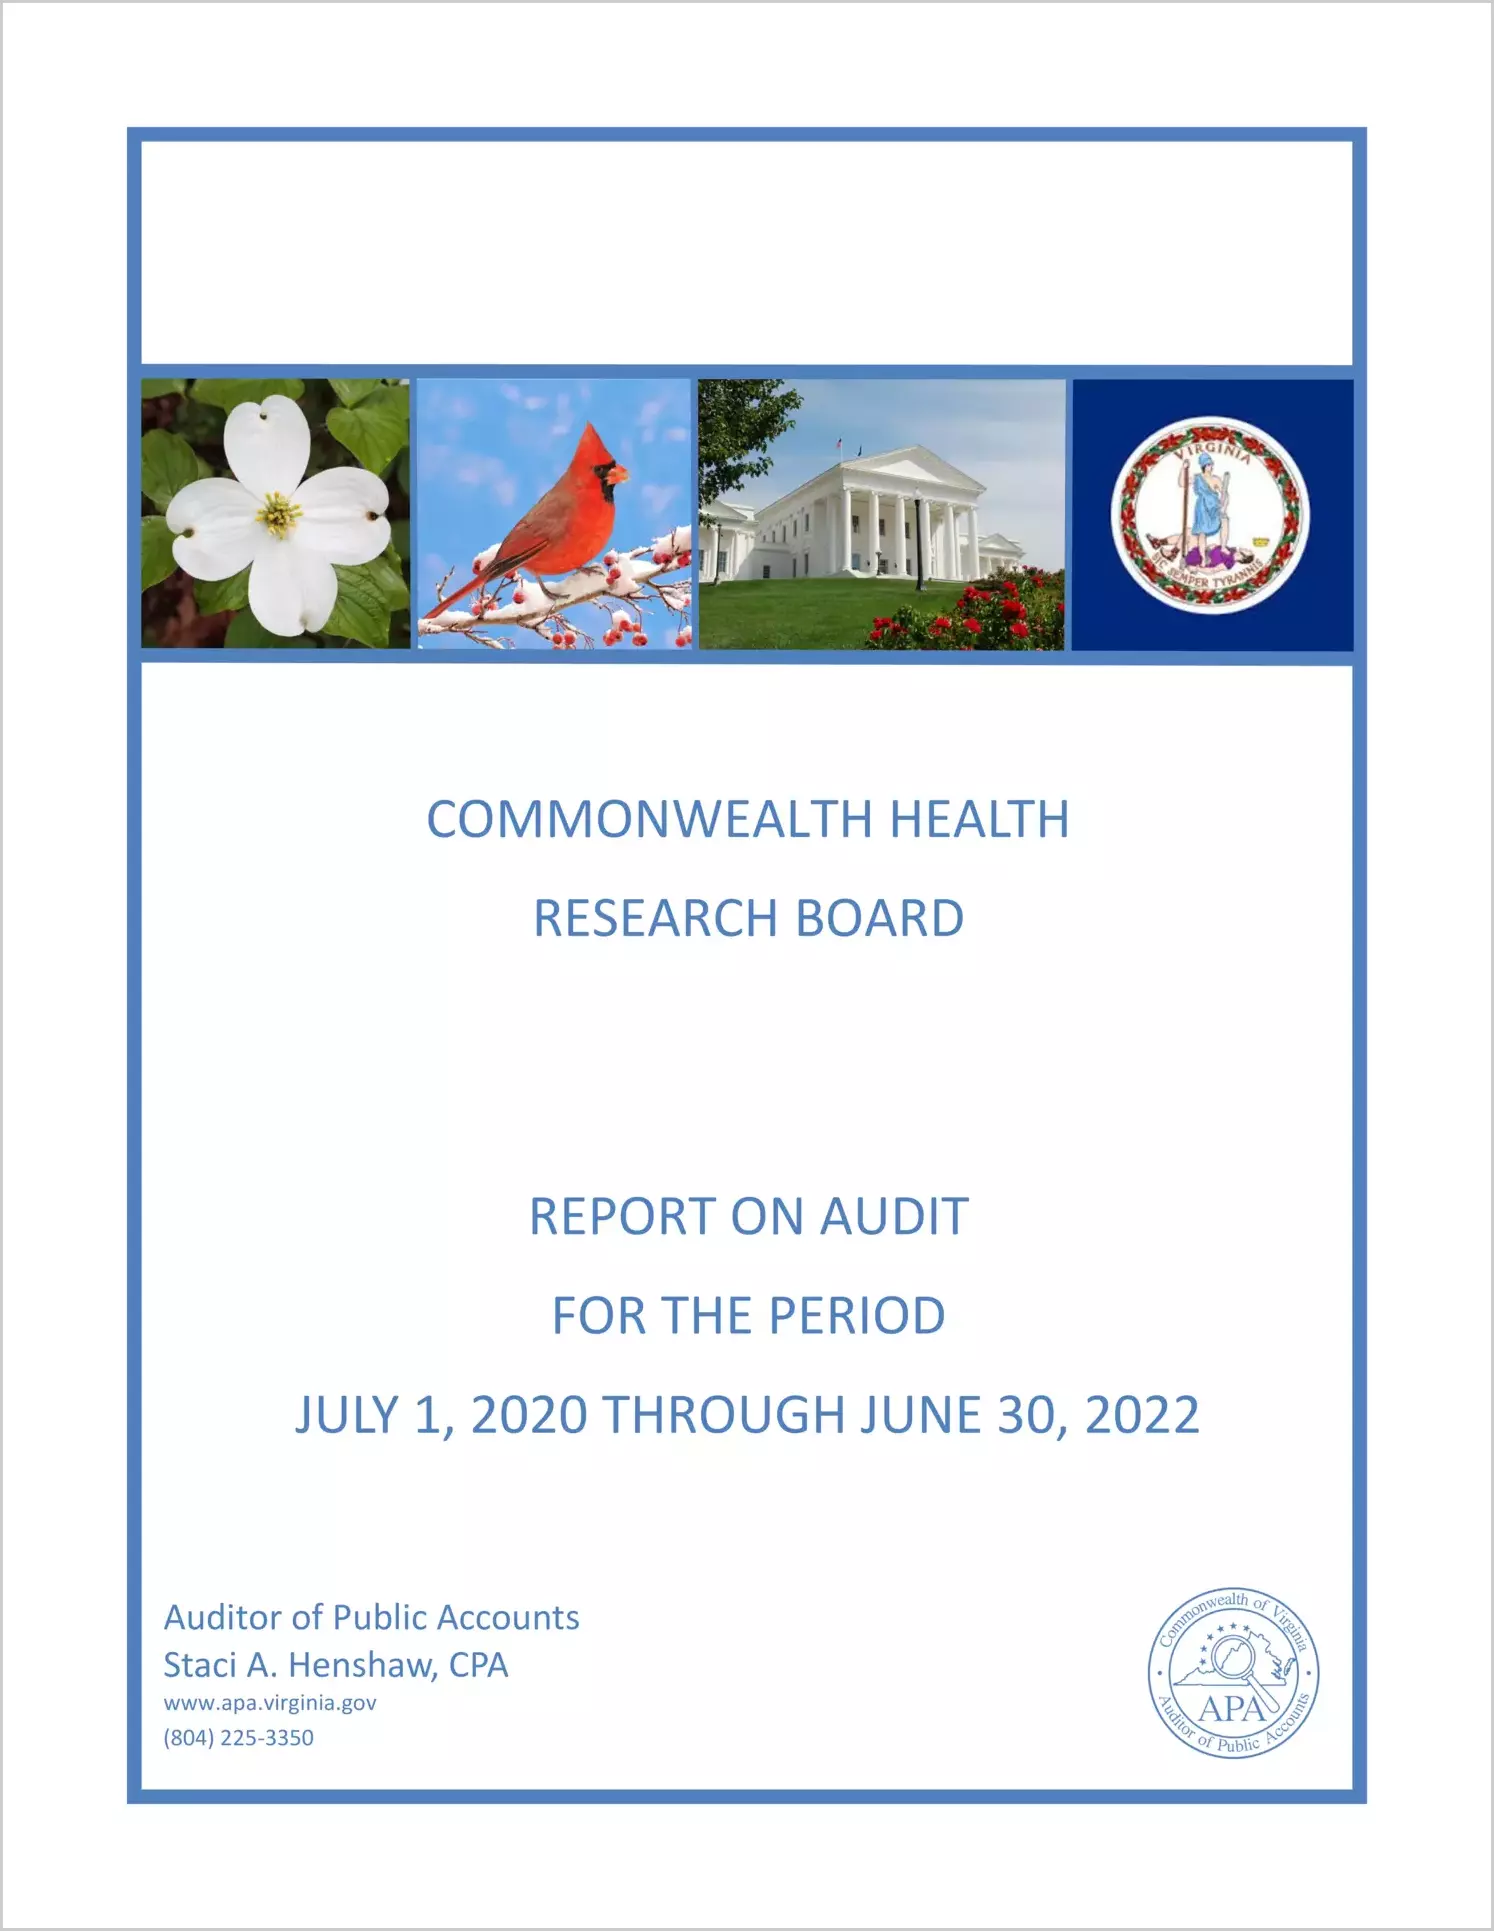 Commonwealth Health Research Board for the period July 1, 2020 through June 30, 2022